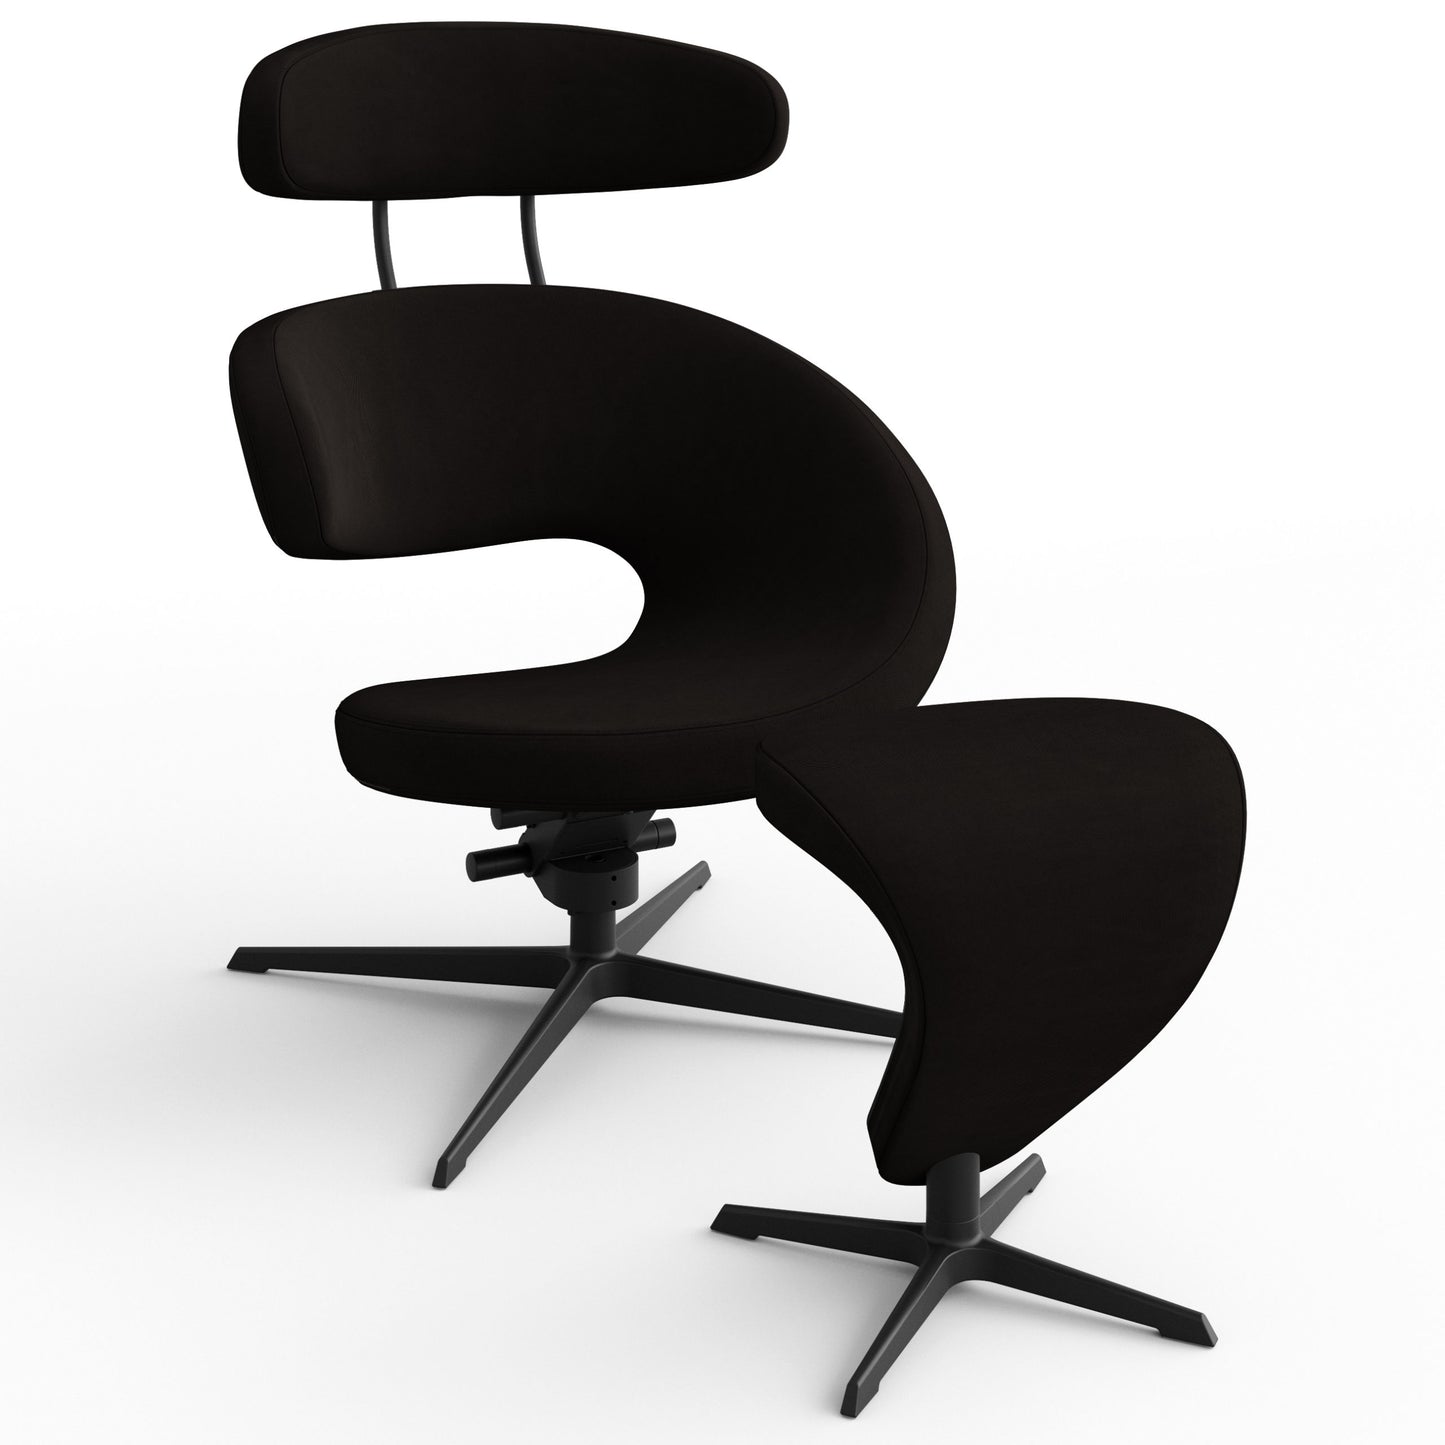 peel with footrest chair by varier - black fabric